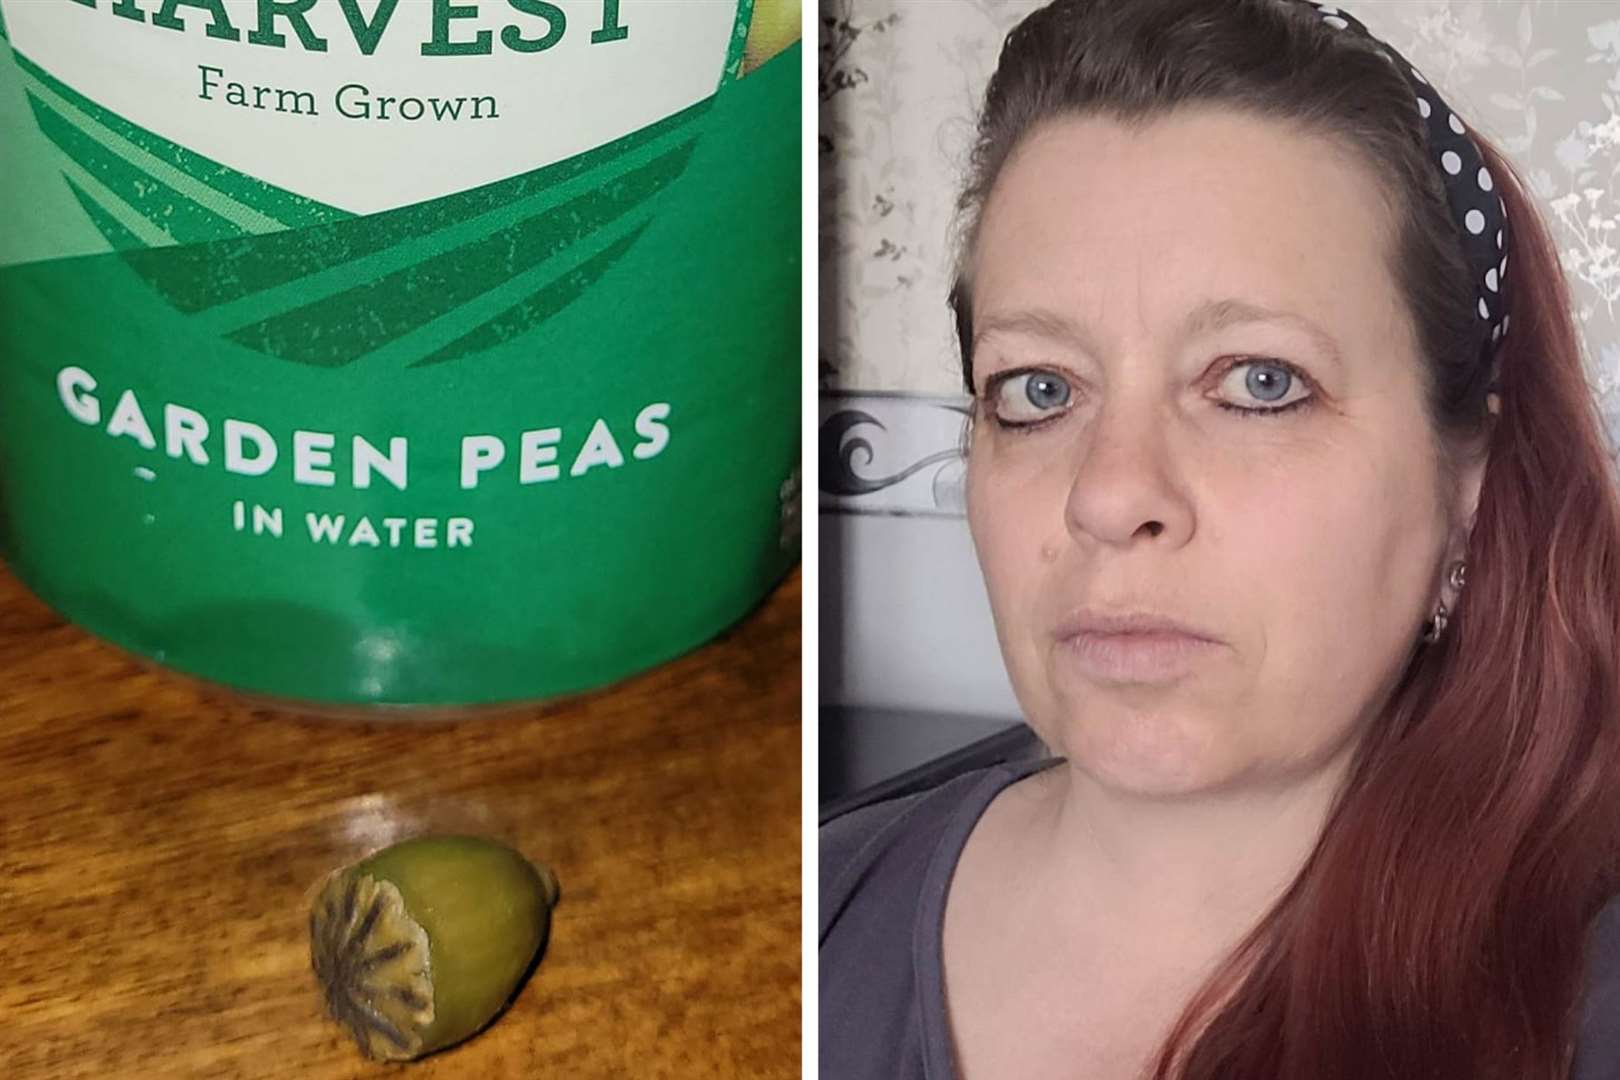 Marie Thomas fears she found a poisonous poppy seed pod in a tin of Tesco peas